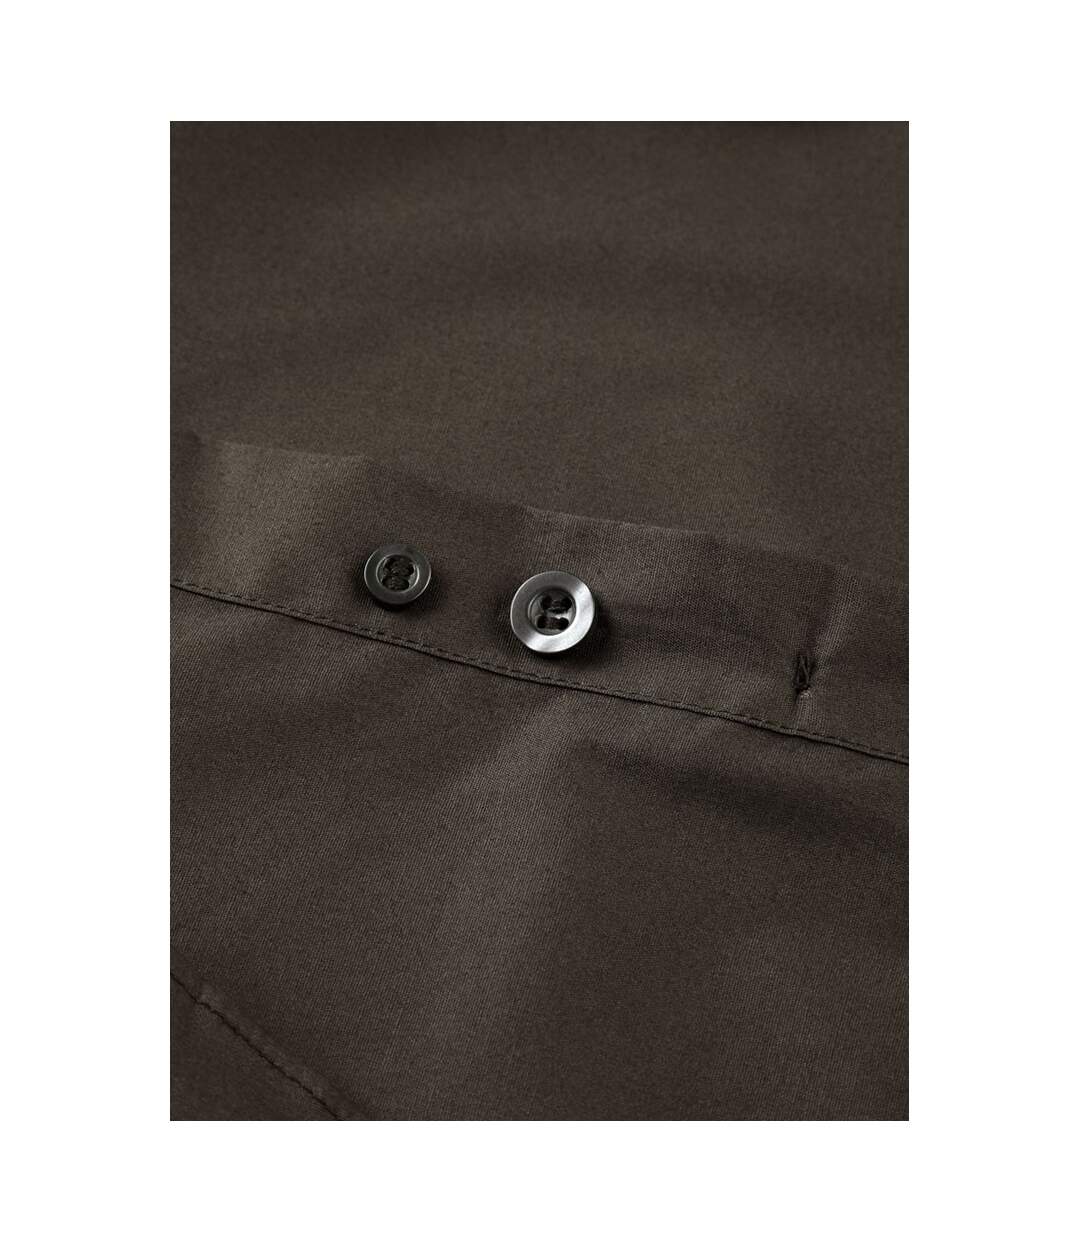 Russell Collection Mens Long Sleeve Easy Care Fitted Shirt (Chocolate)